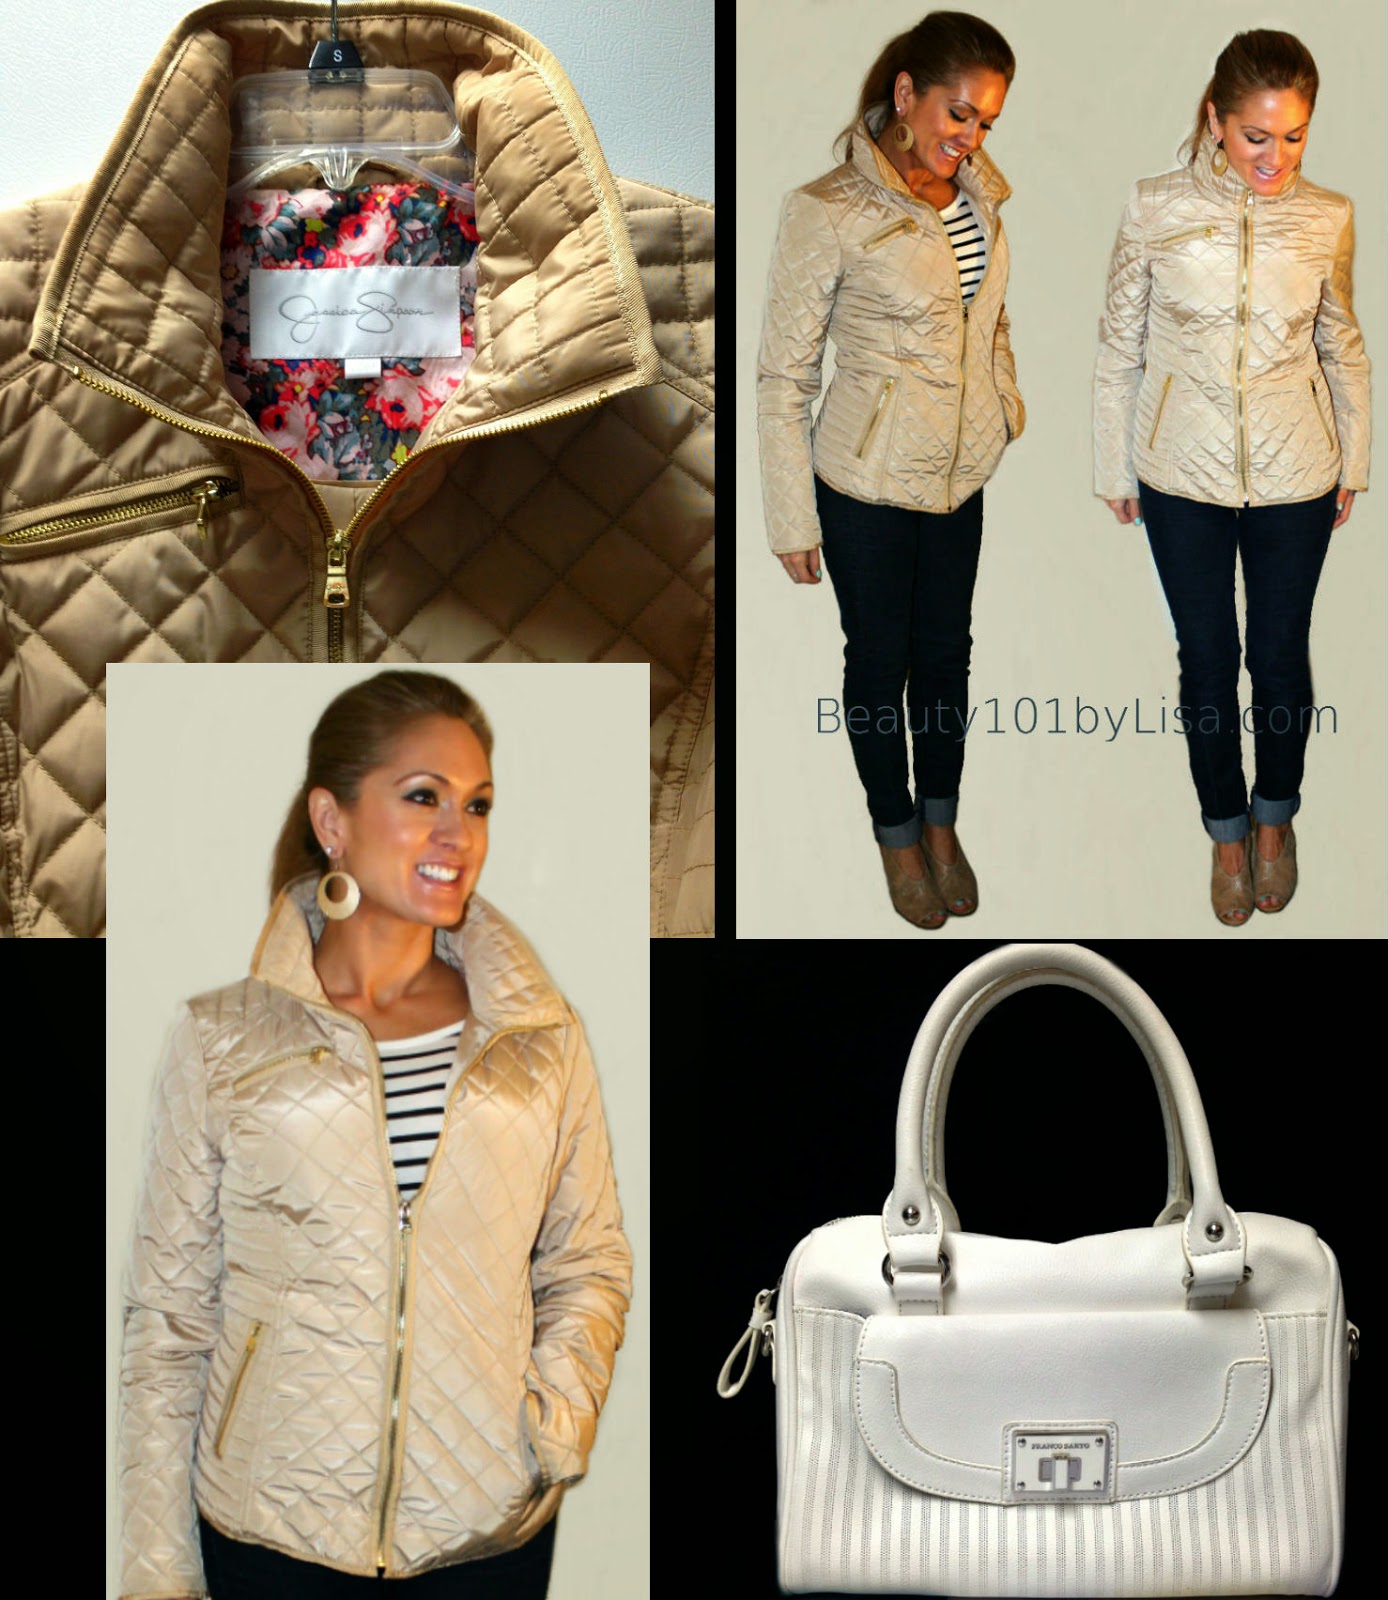 BEAUTY101BYLISA: T.J.Maxx Winter Clearance - Fabulous Quilted Jacket!